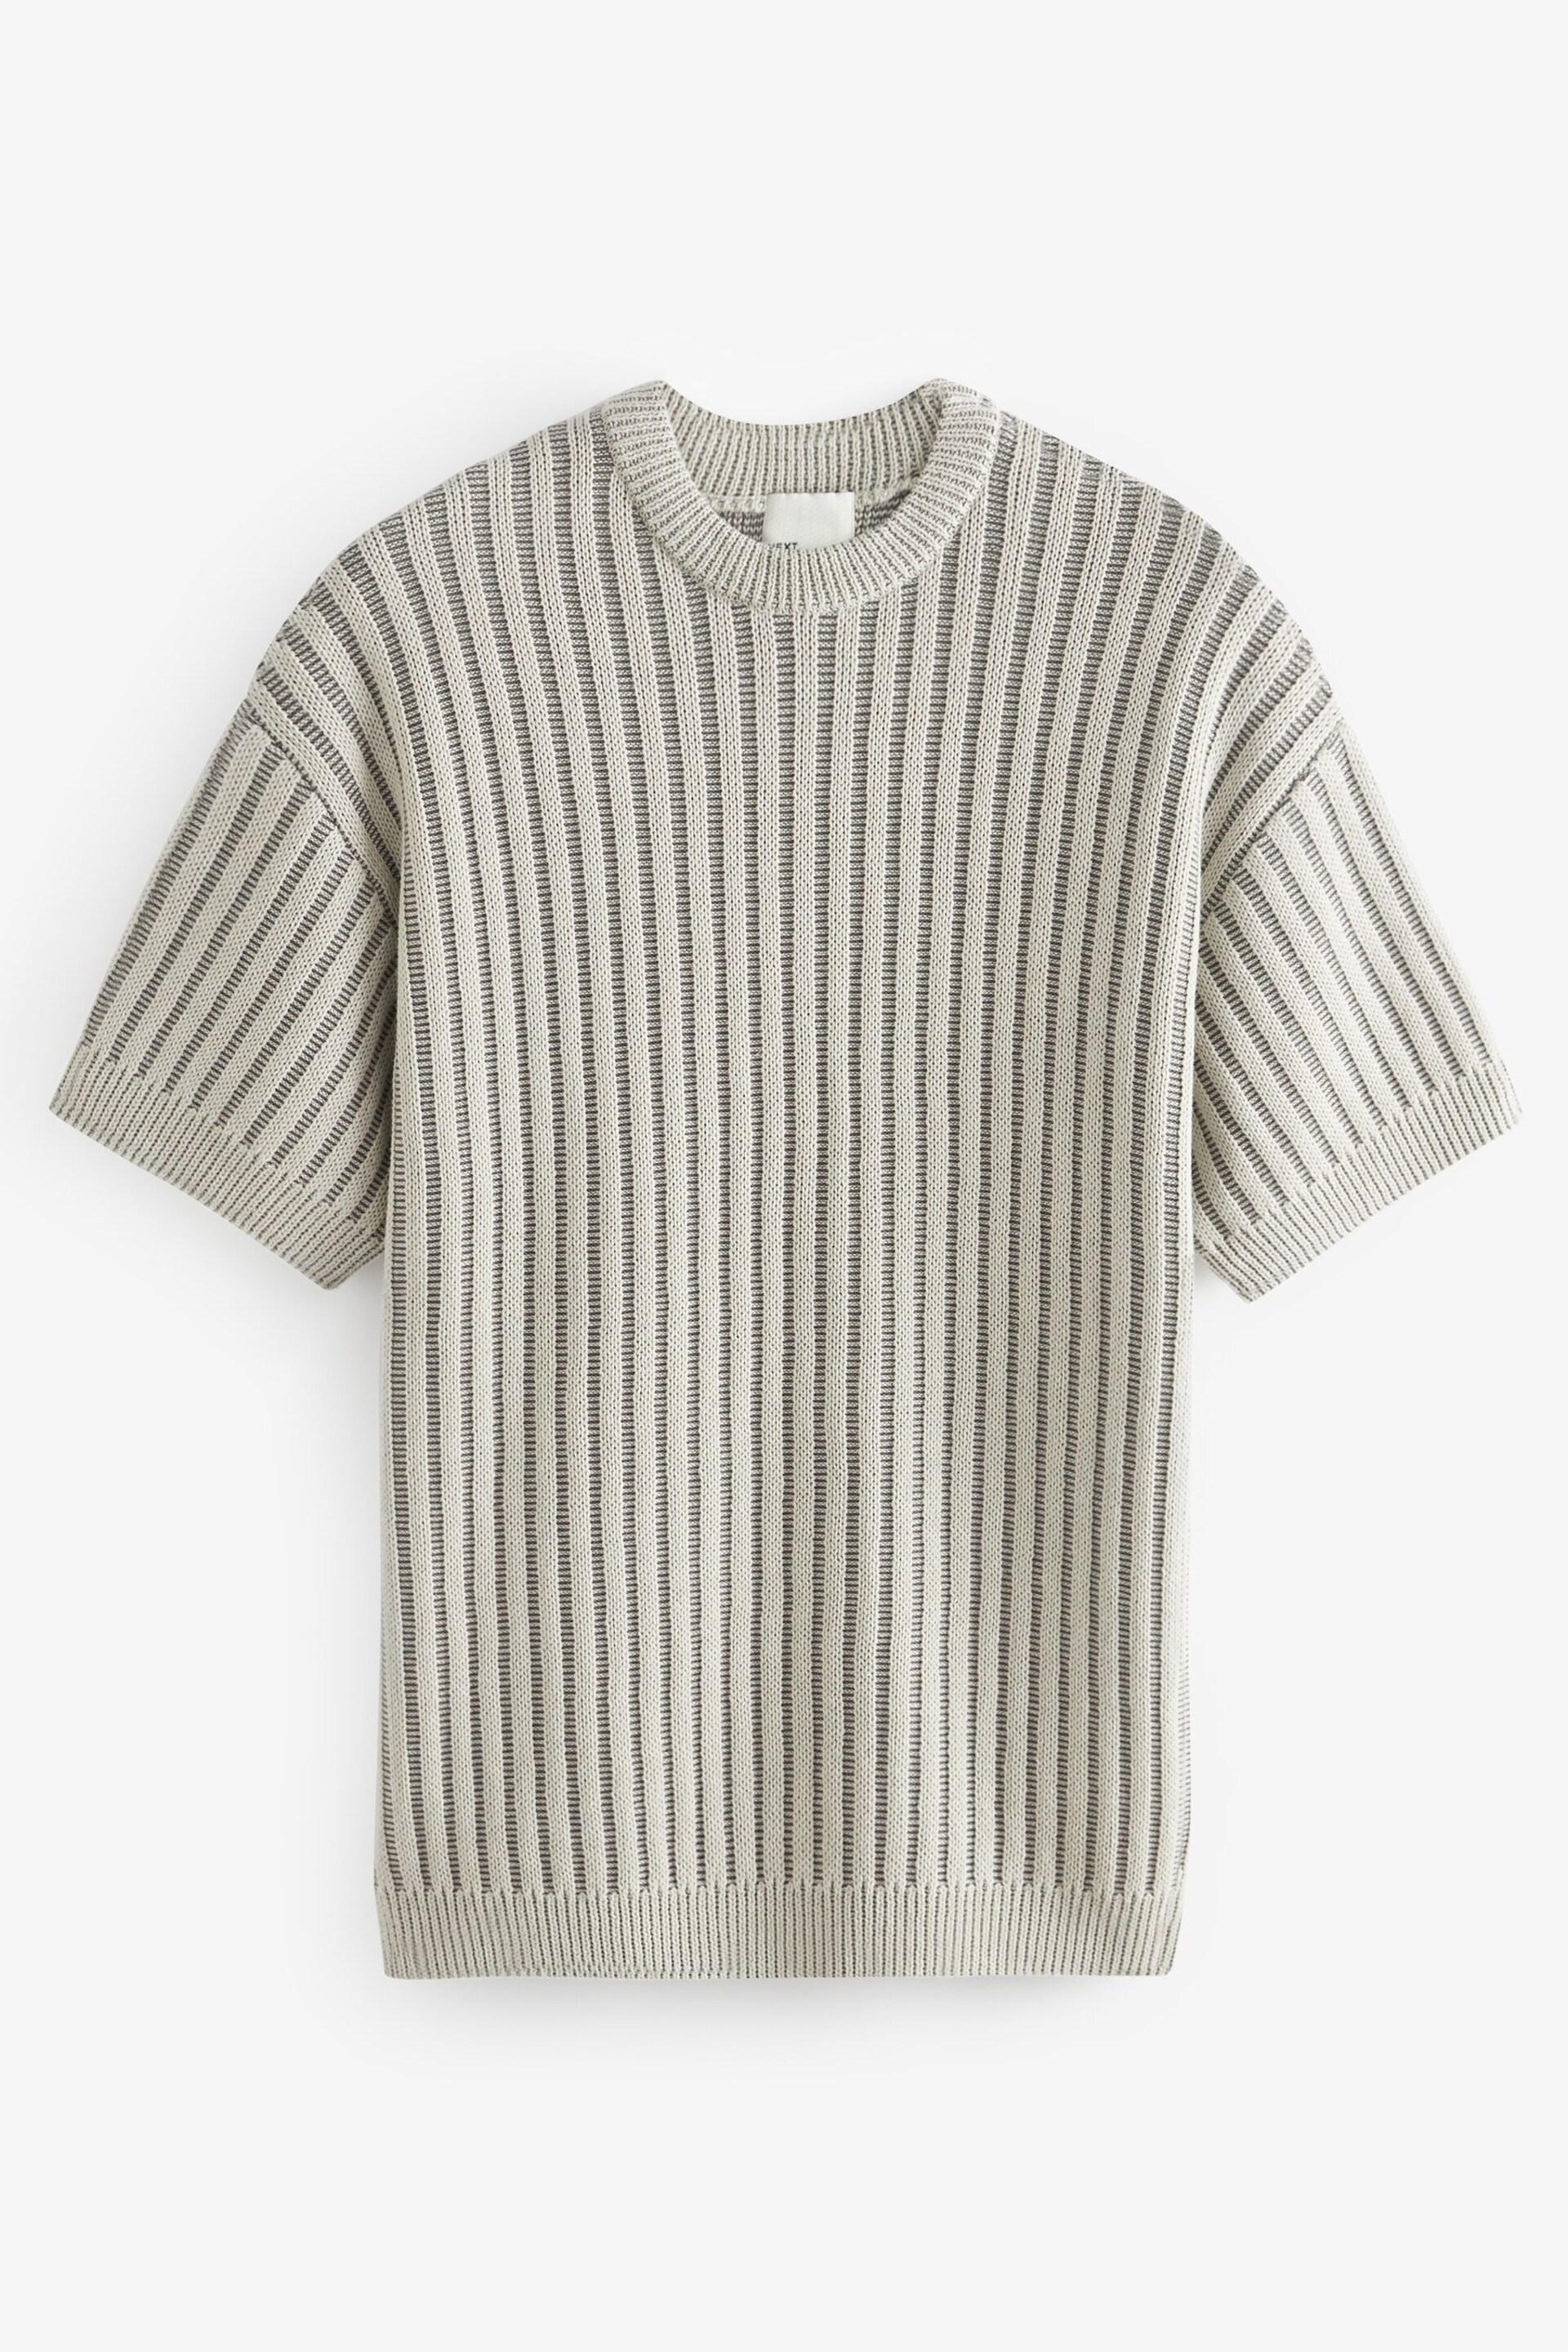 Grey EDIT Relaxed Short Sleeve Knitted Crew Jumper - Image 5 of 7